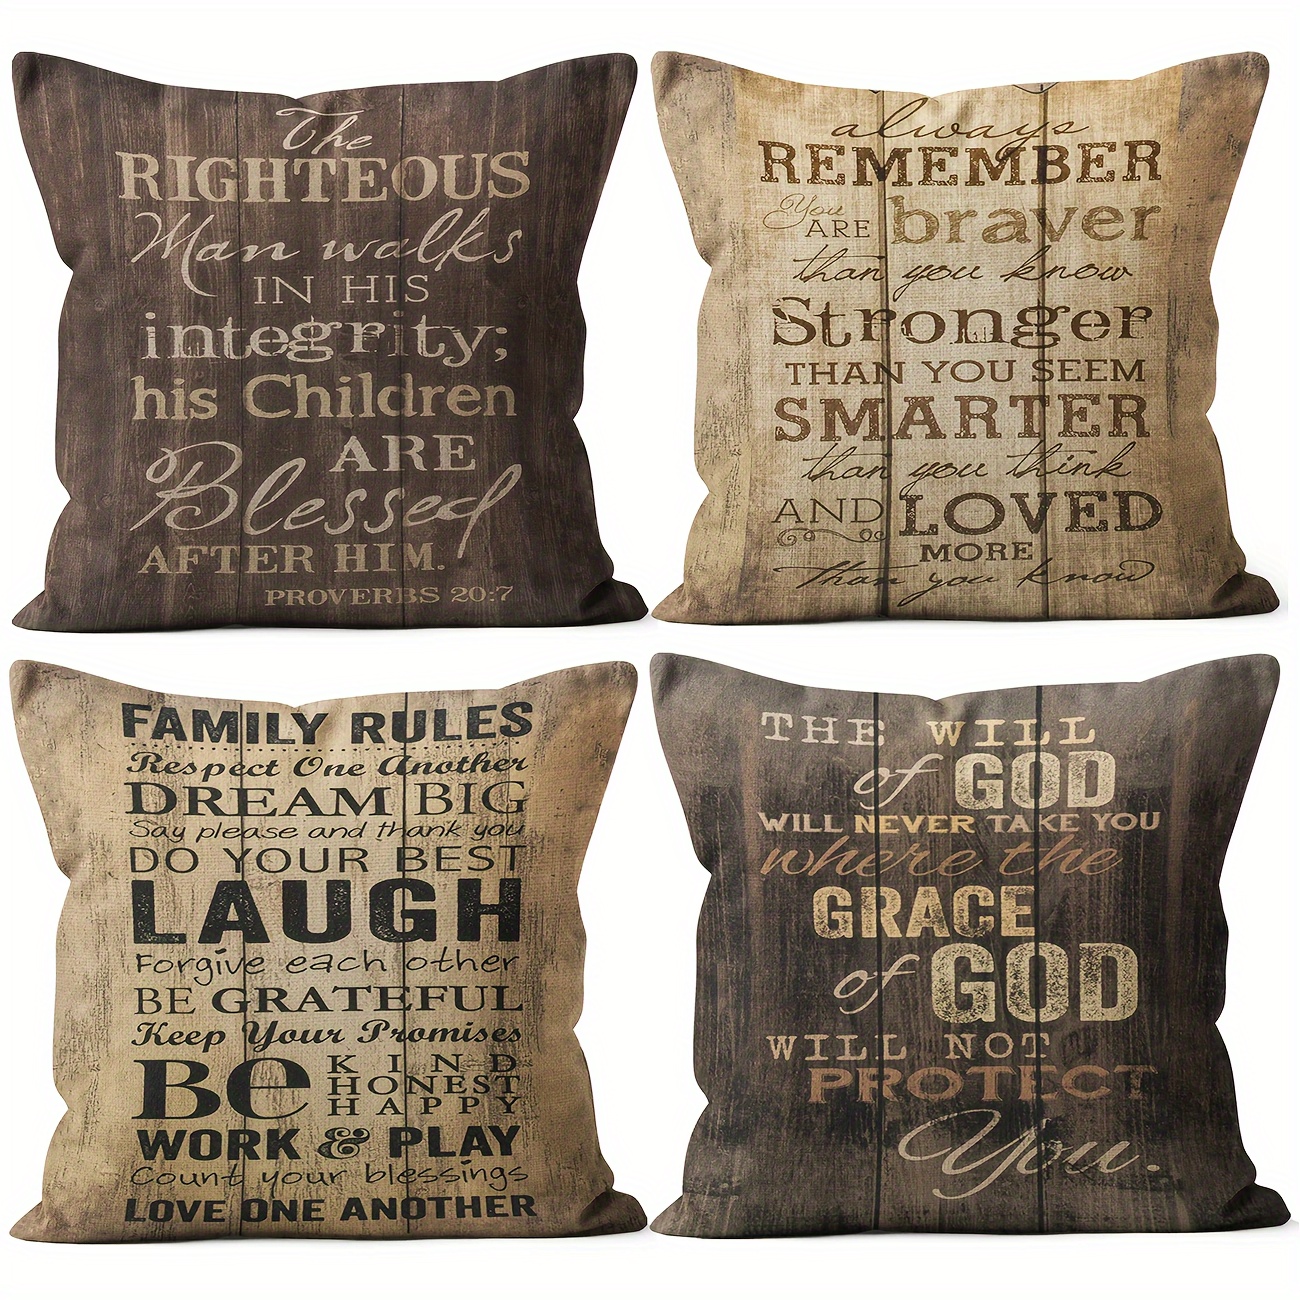 

4pcs Vintage Rustic Style Amazing Inspiring Throw Pillow Covers Gifts For Farm Porch Bench Pillow Cases For Sofa Bed Couch Farm Living Room Decor Short Plush Decor 18x18 Inch